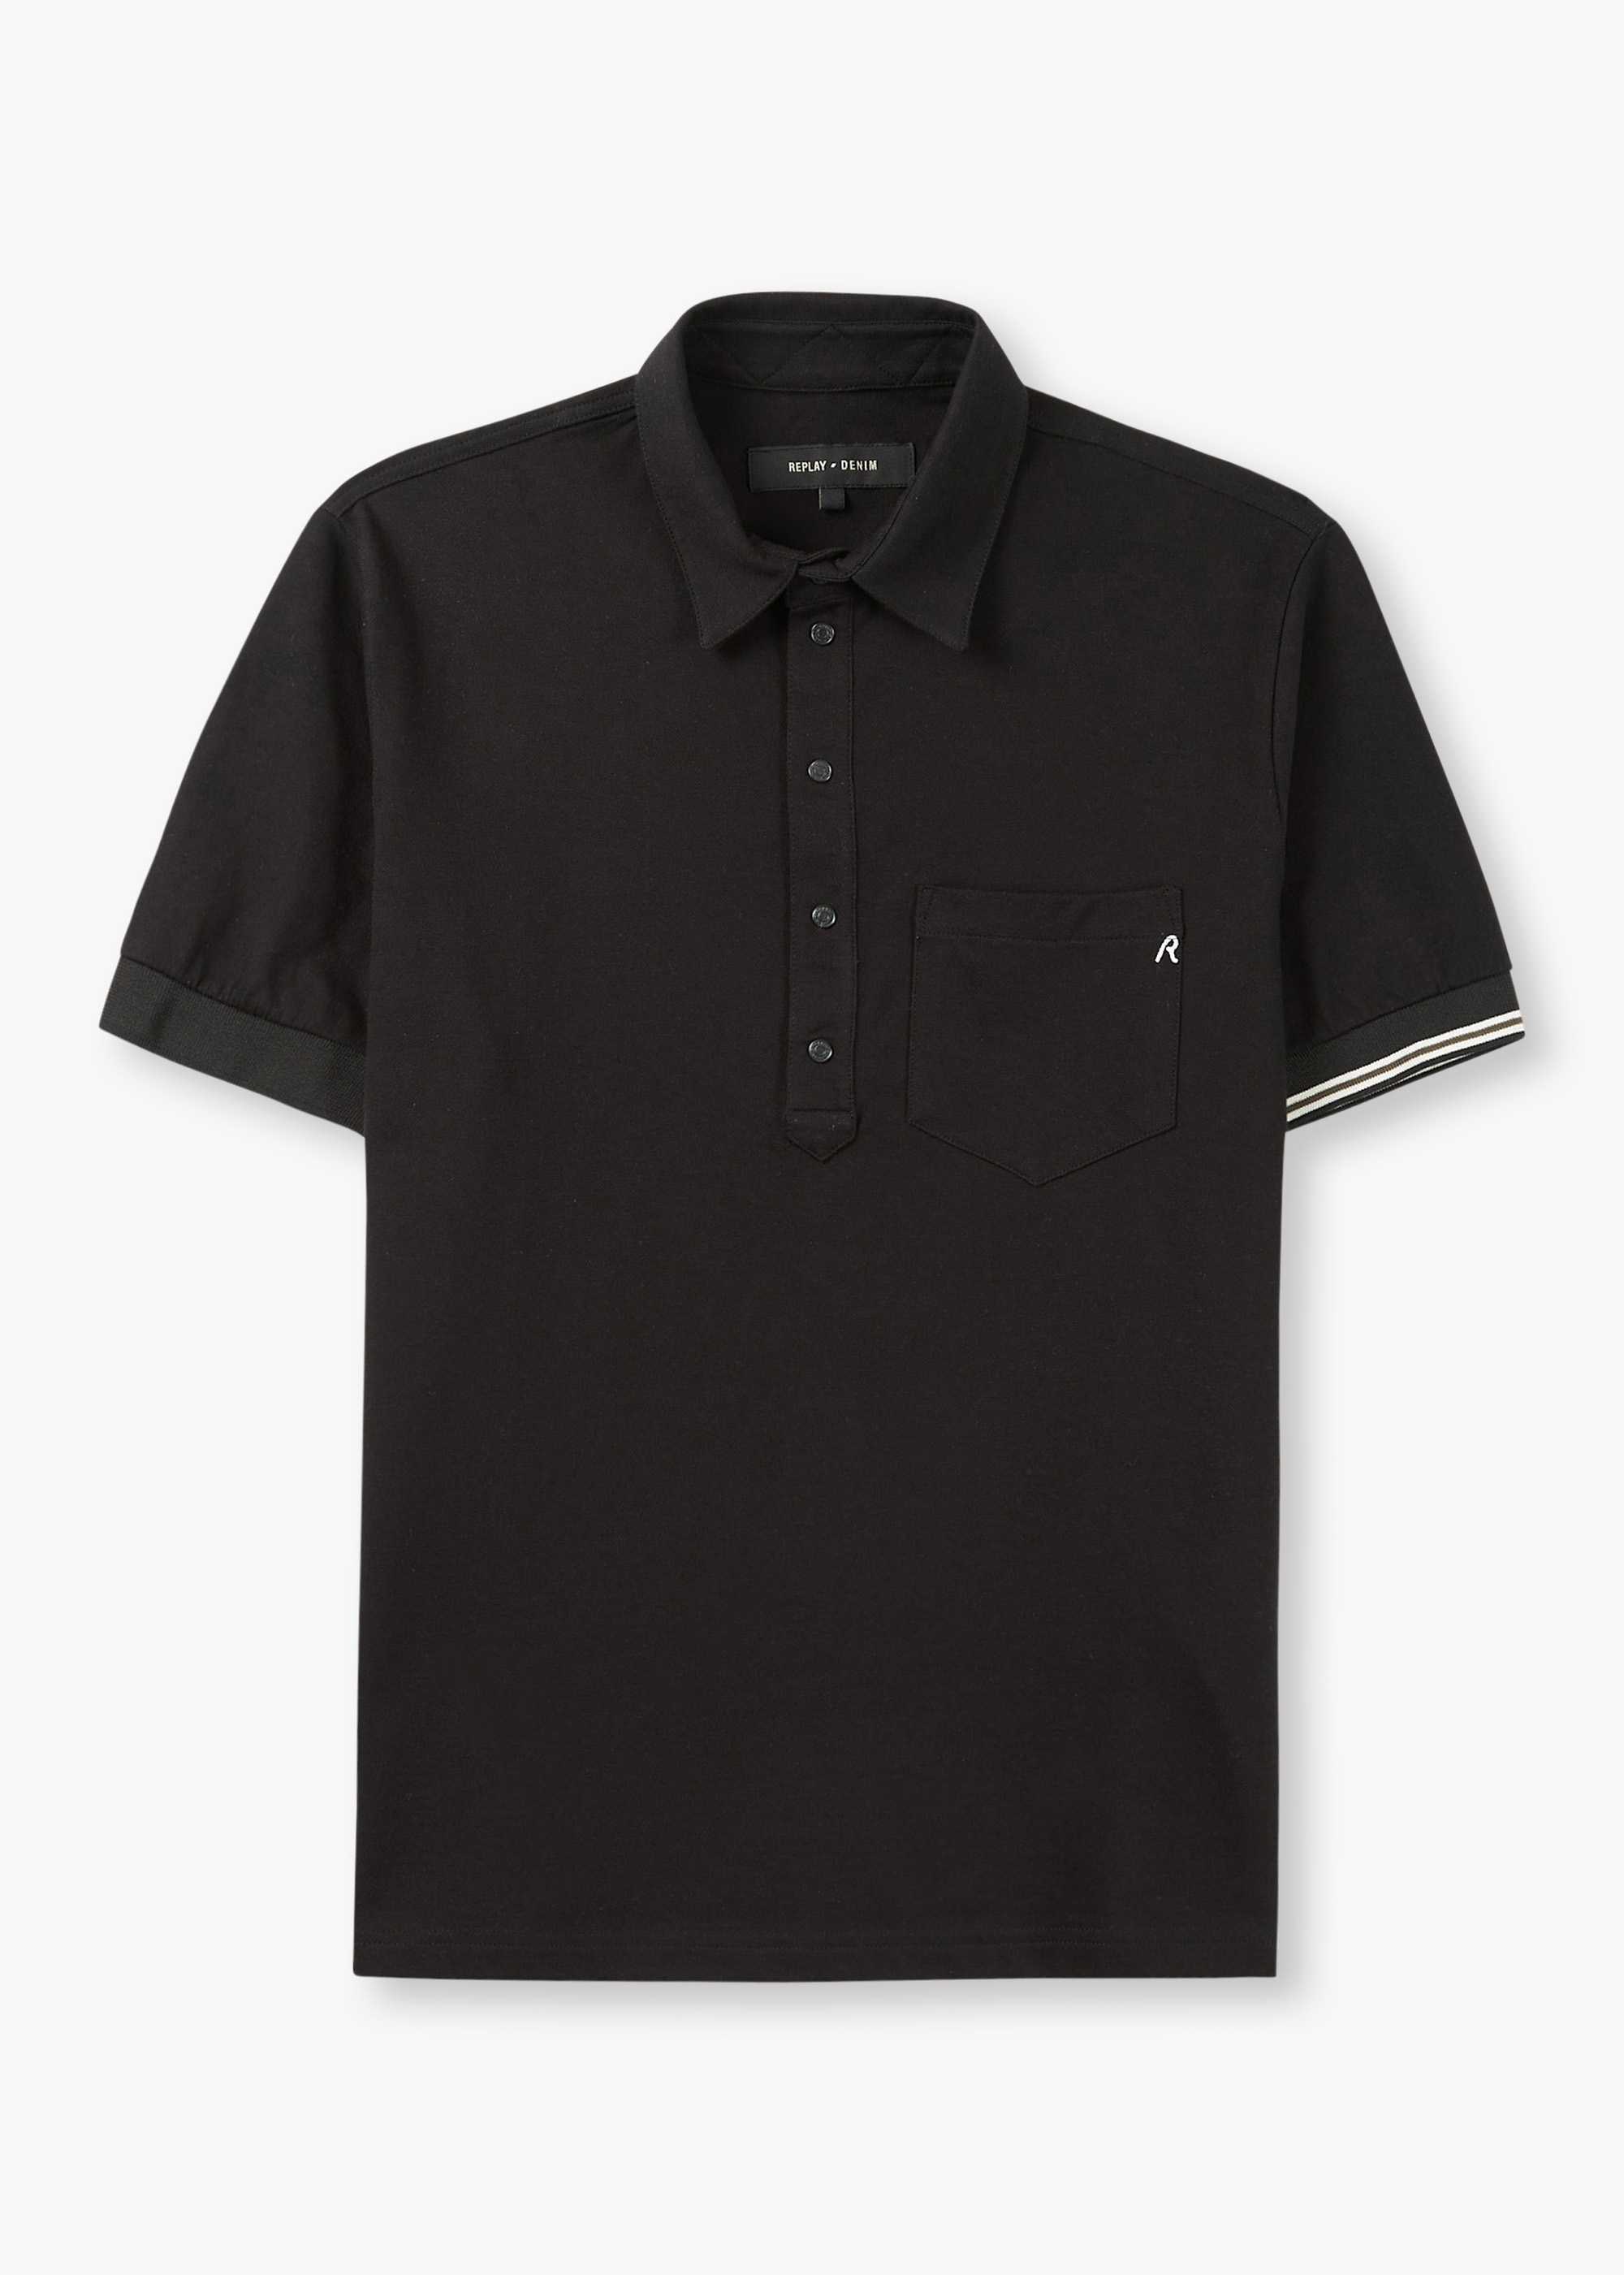 Replay Sartoriale Mens Polo Shirt In Black